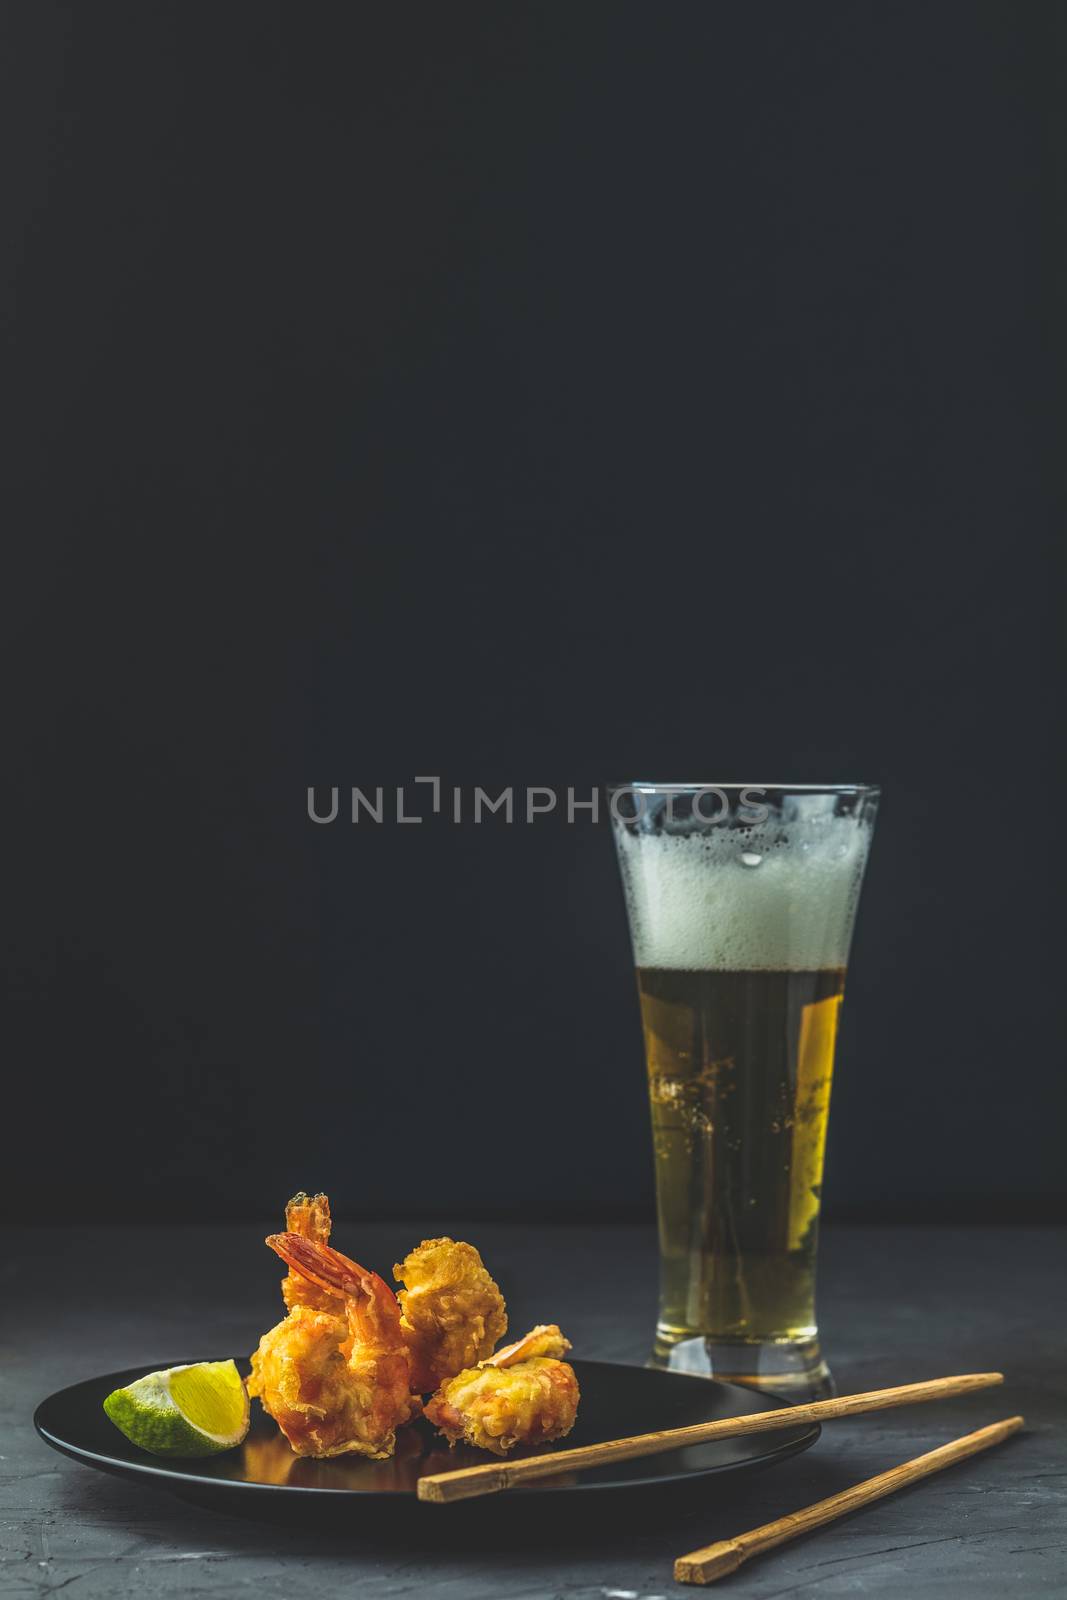 Fried Shrimps tempura with lime in black plate and glass of light beer on dark concrete surface background. Copy space. Seafood tempura dish served japanese or eastern Asia style with chopsticks